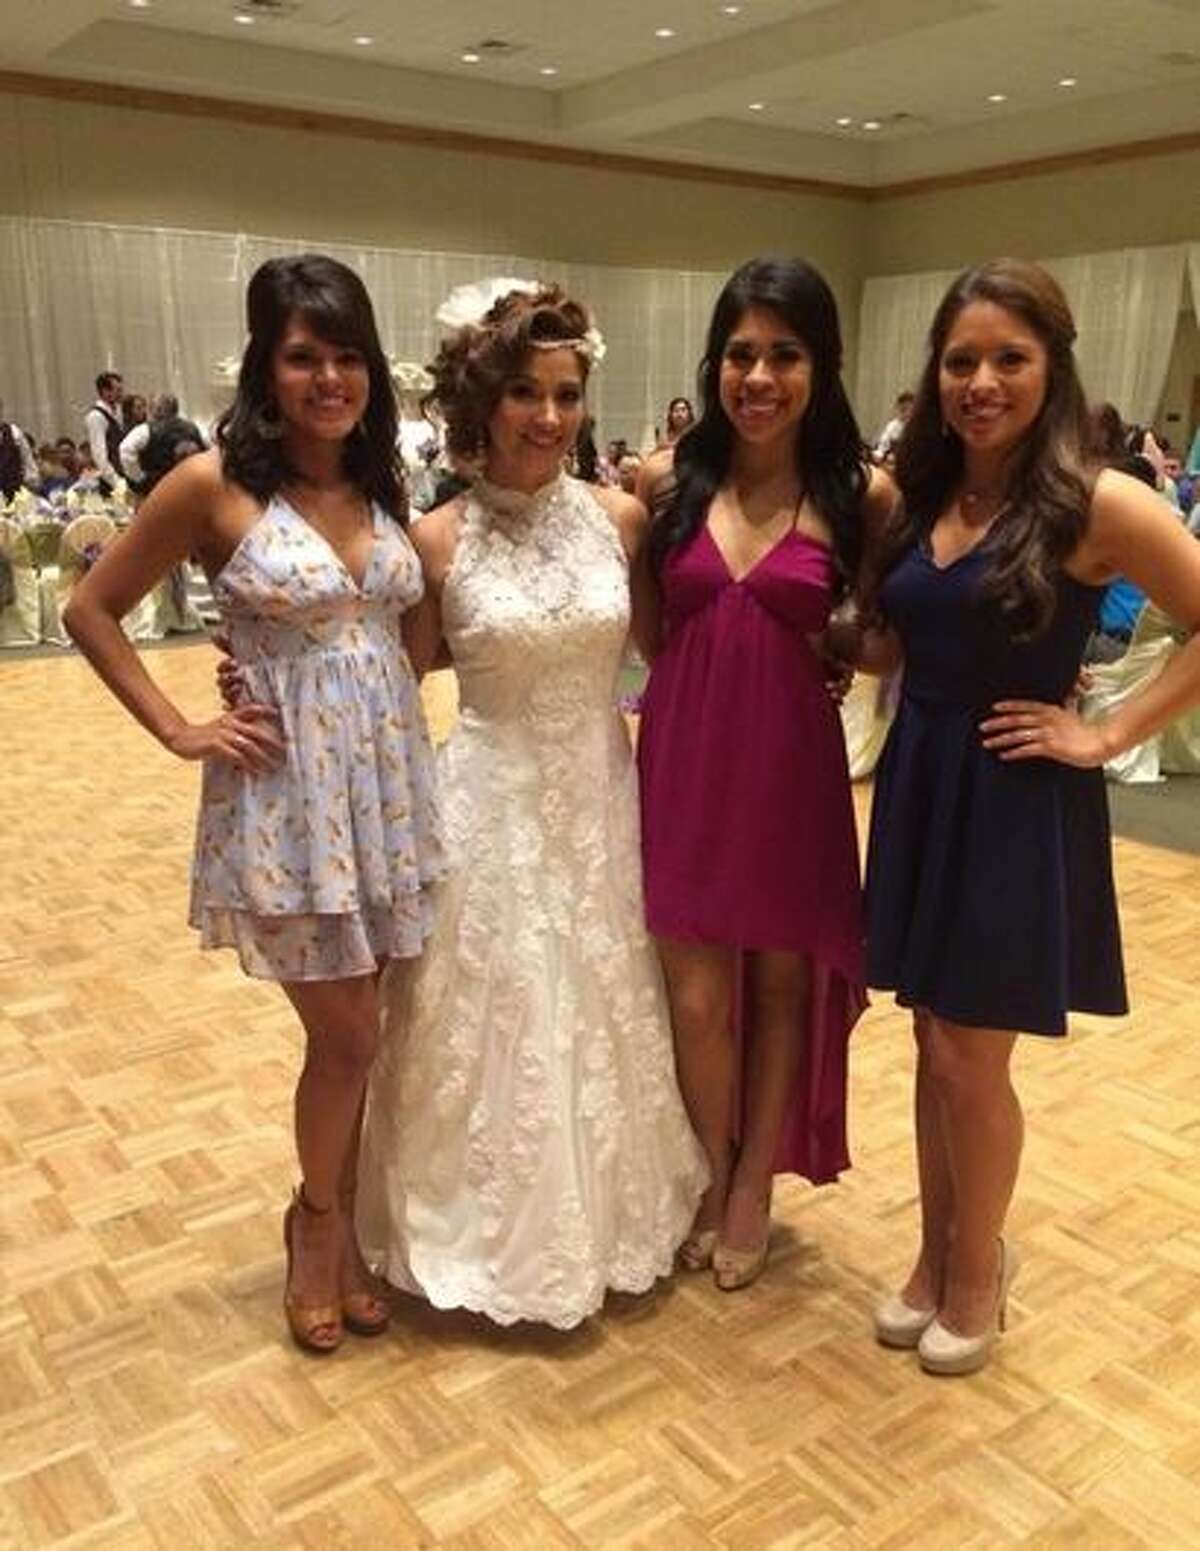 Before Silver Dancer vet Denise Hernandez got an invitation to return to the squad on Sunday, she got a ring and said “I do,” surrounded by her teammates. A group of the sexy strutters traded in their chaps for dresses and headed to Holy Trinity Banquet Hall for Hernandez’s wedding reception on Saturday, making what happened next inevitable.